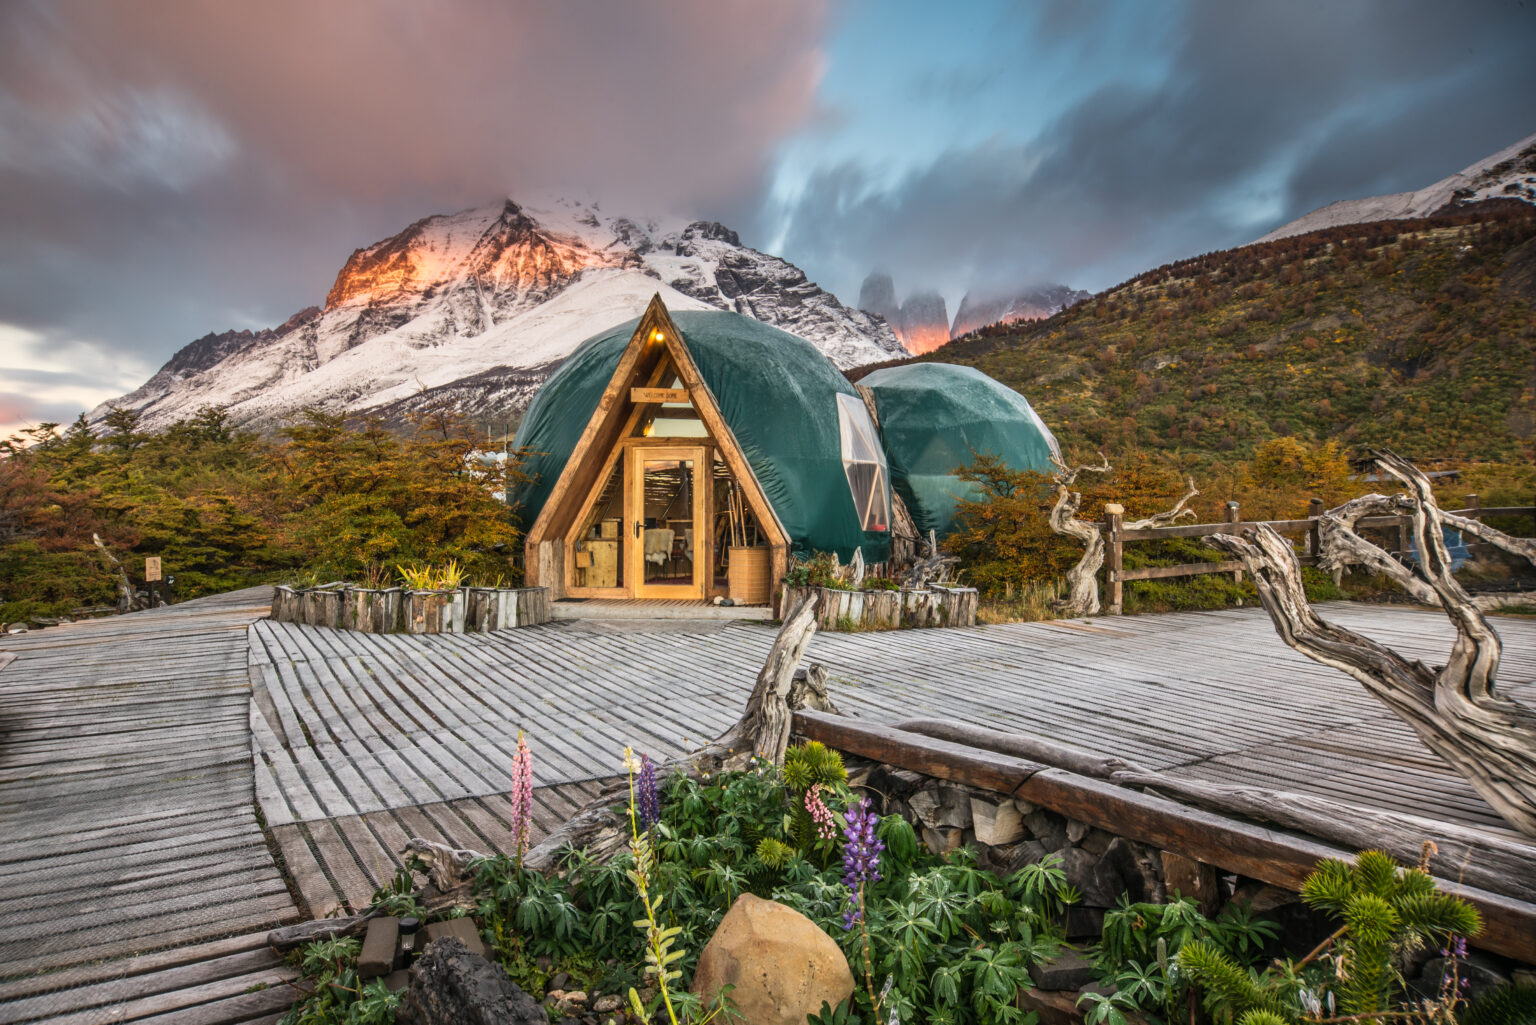 Eco Camp dome with the wooden walkways in the foreground and mountains in the background